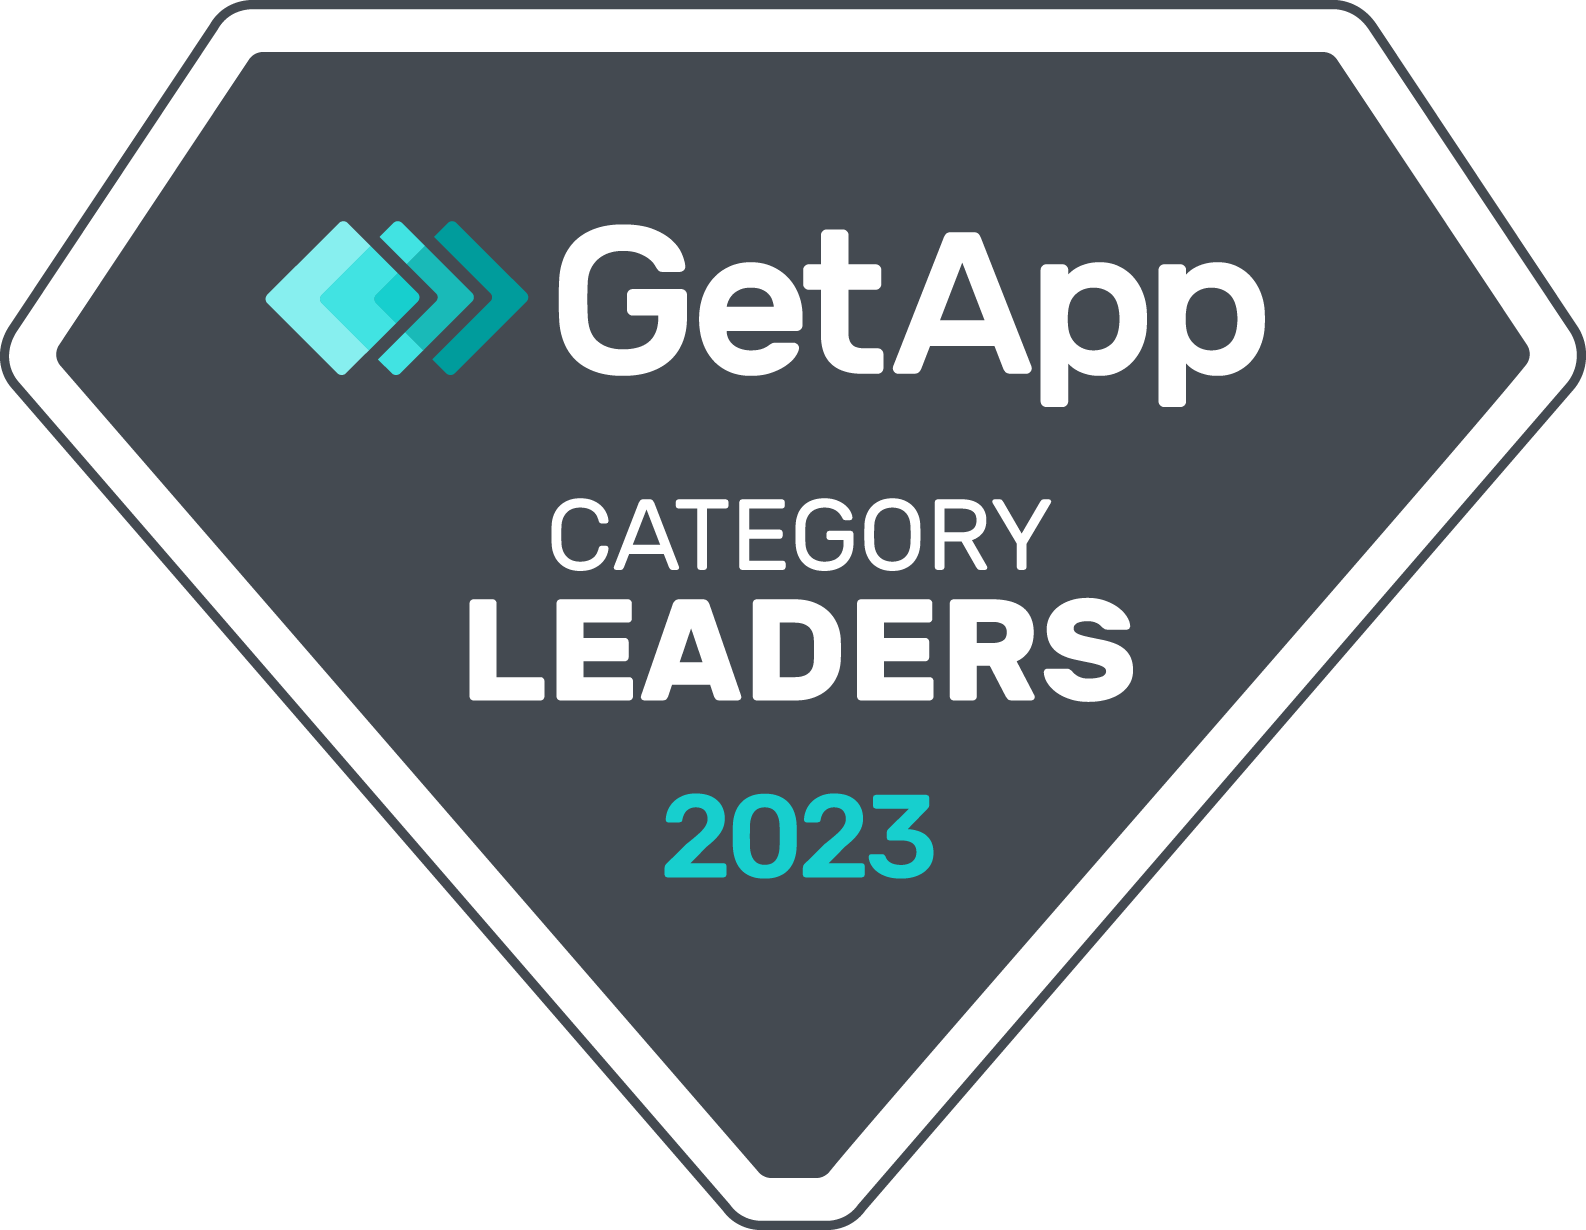 QuoteWerks was named a Category Leader in the Proposal and Quoting Software Categories by GetApp for 2023